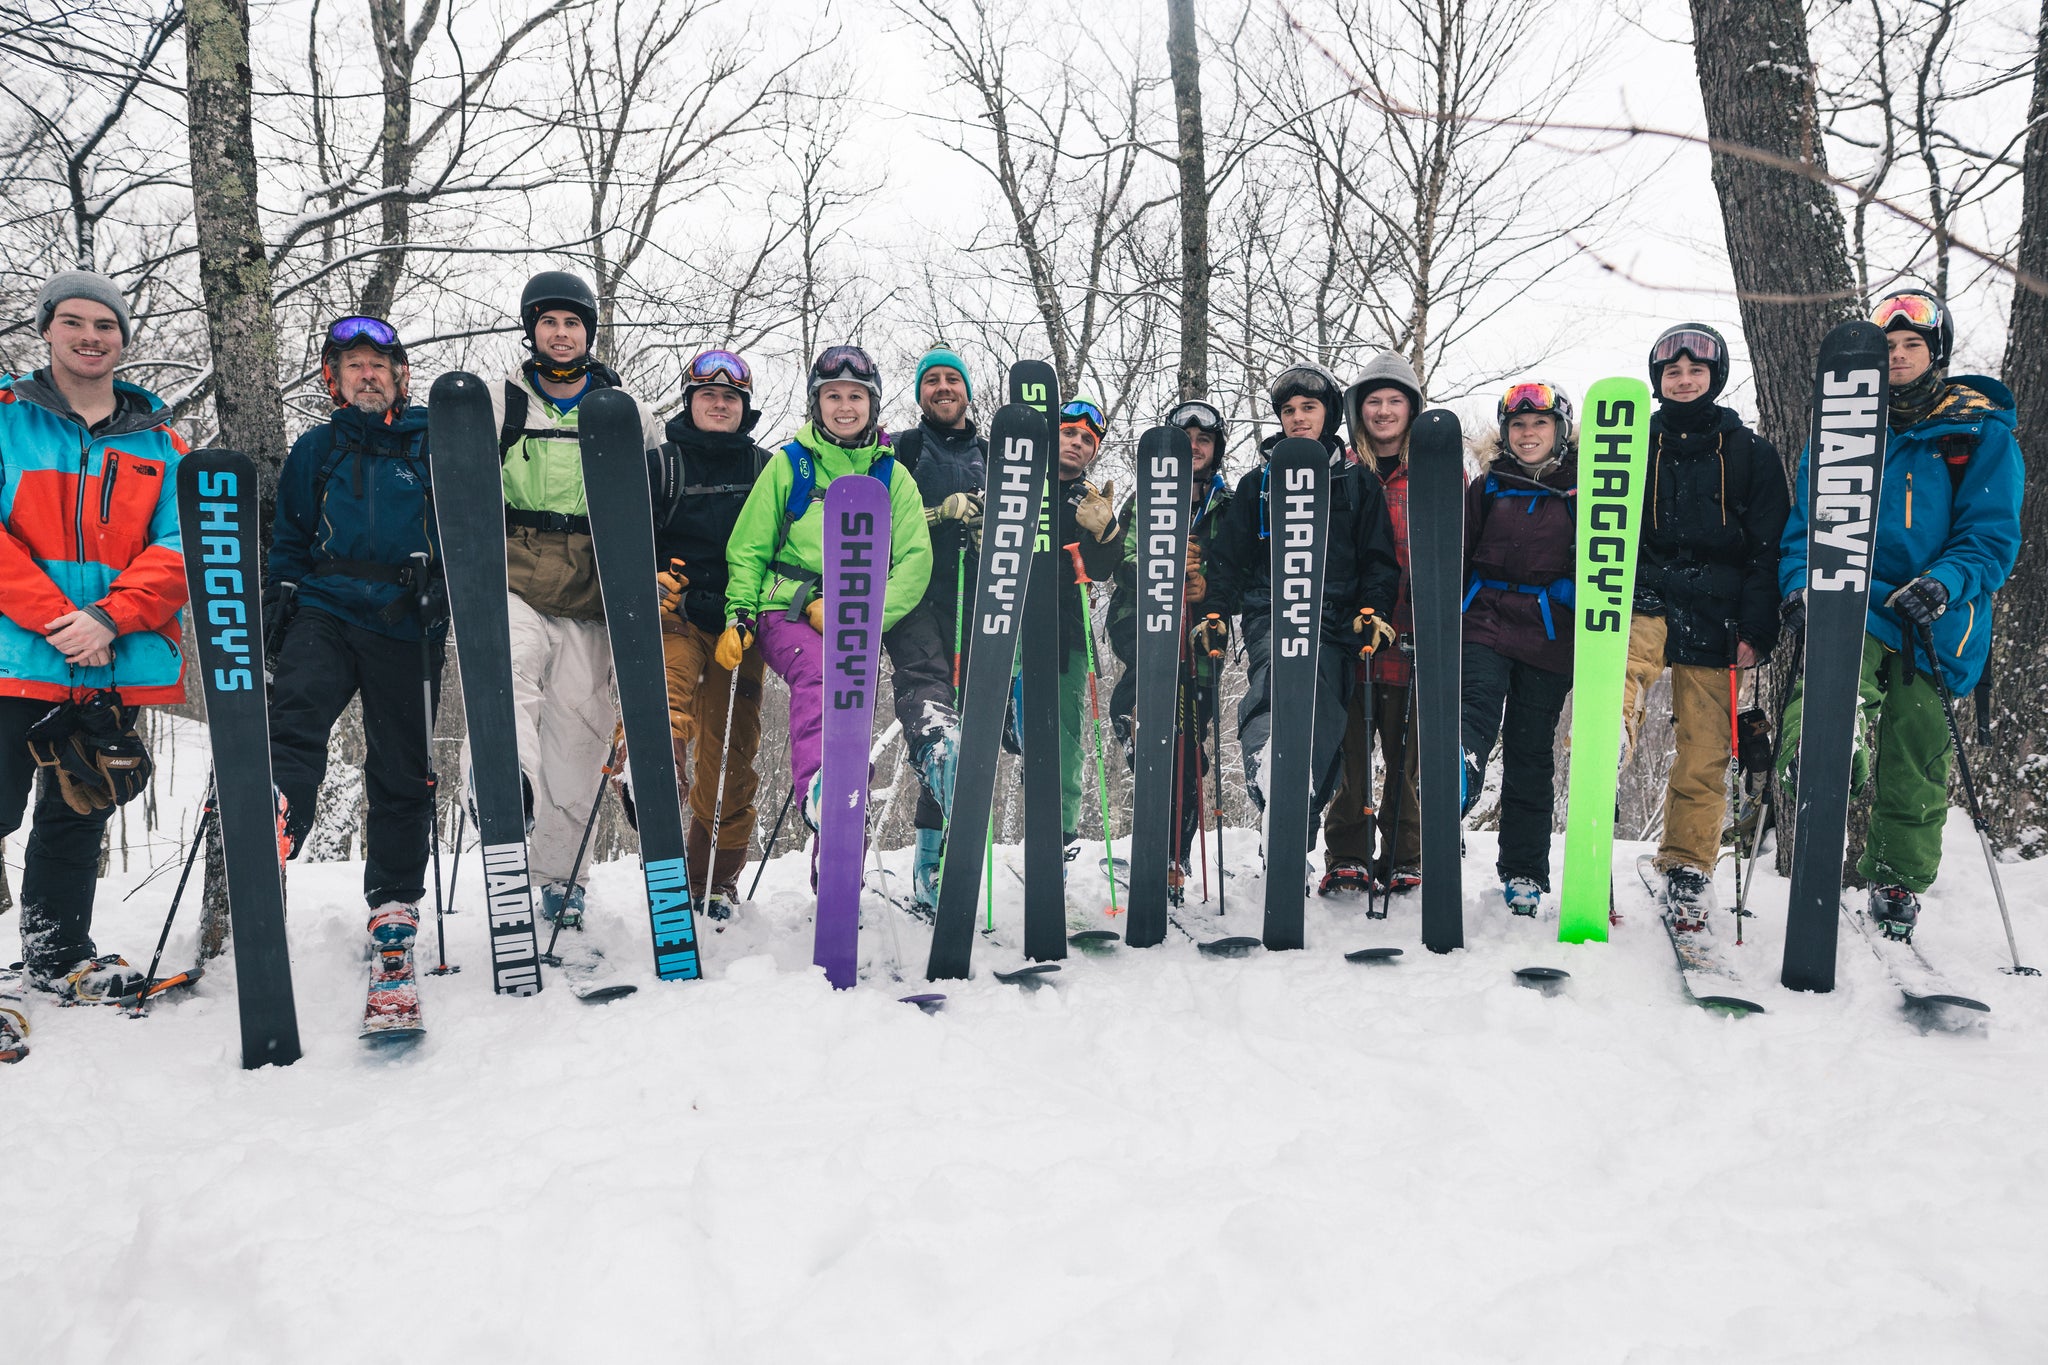 Shaggy's Skis - Skiing with Friends